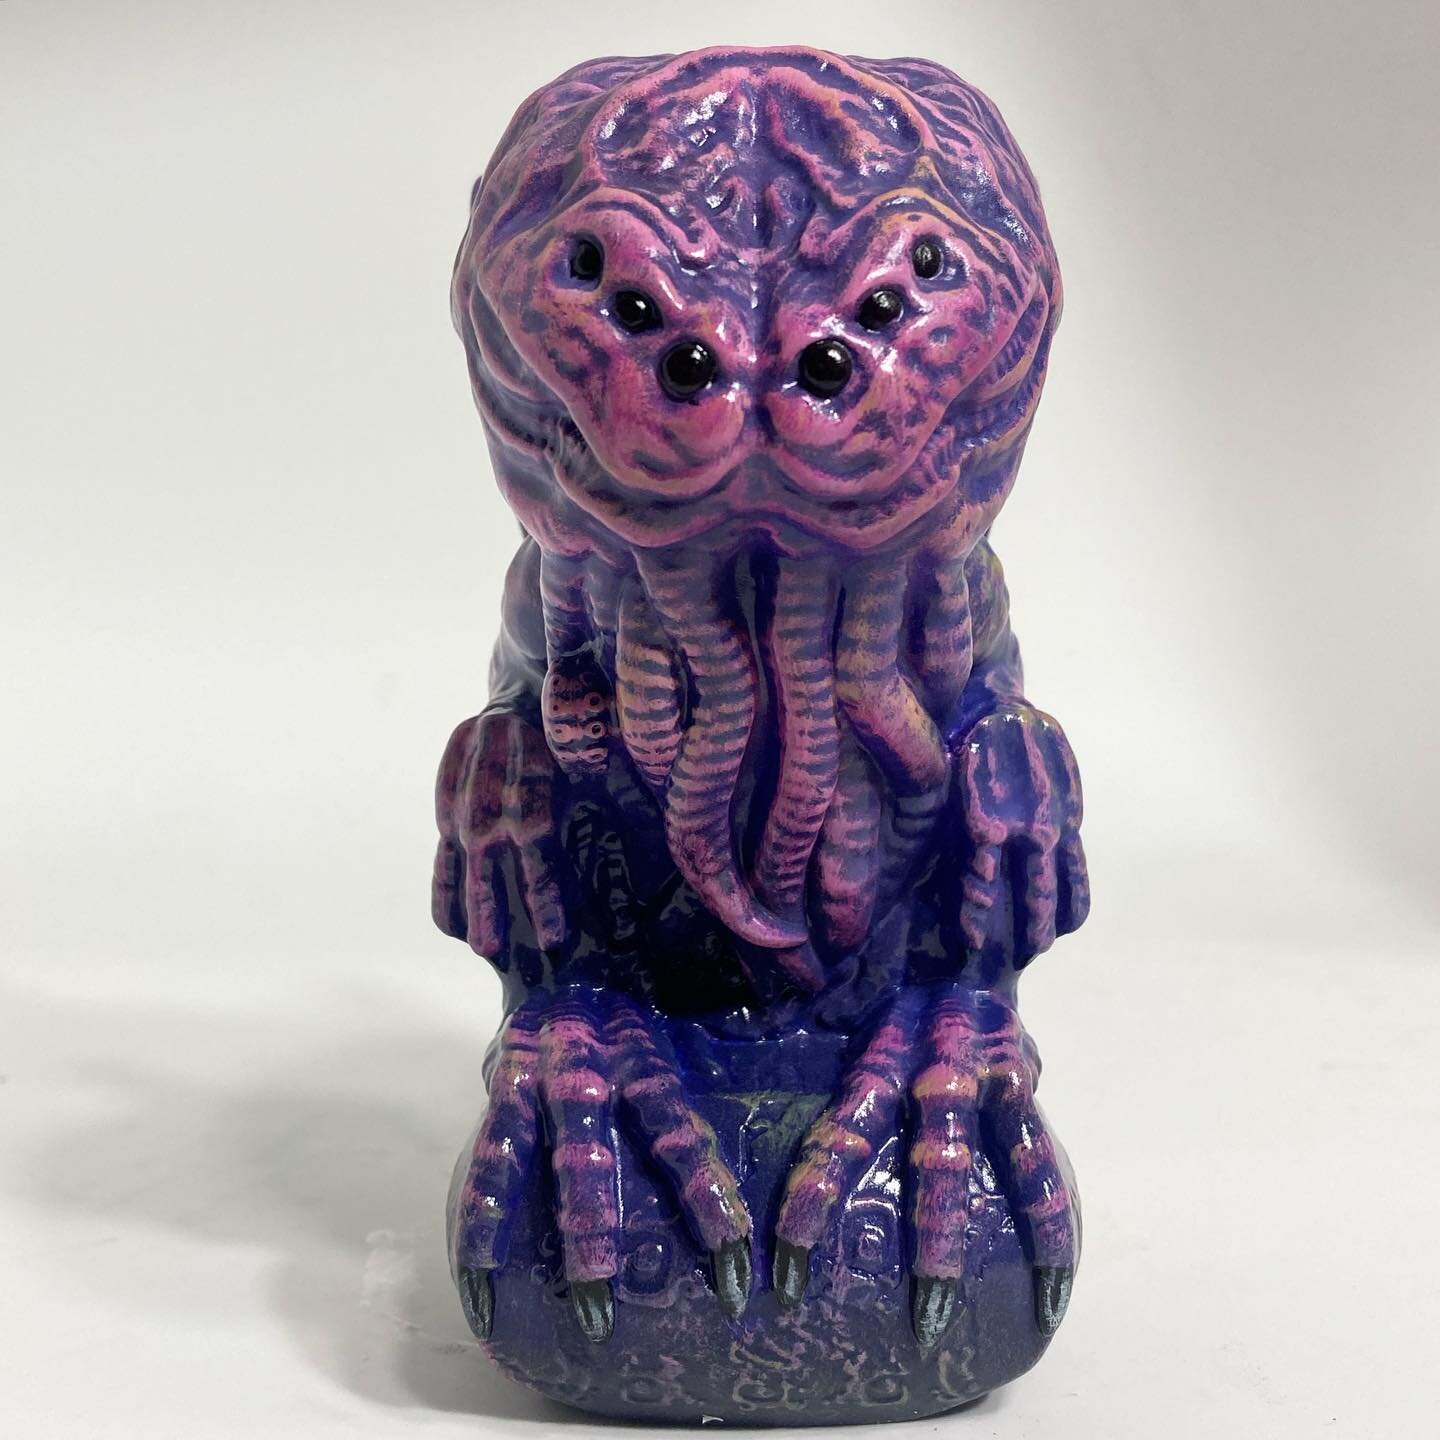 My latest and greatest sofubi joint venture with @tenacioustoys in our &ldquo;cryptozoofubi&rdquo; line: Cthulhu! 
Yes he&rsquo;s not a true cryptid, but the cosmic old one absolutely deserved a go in vinyl, and in my extensively nerdy existence I ha